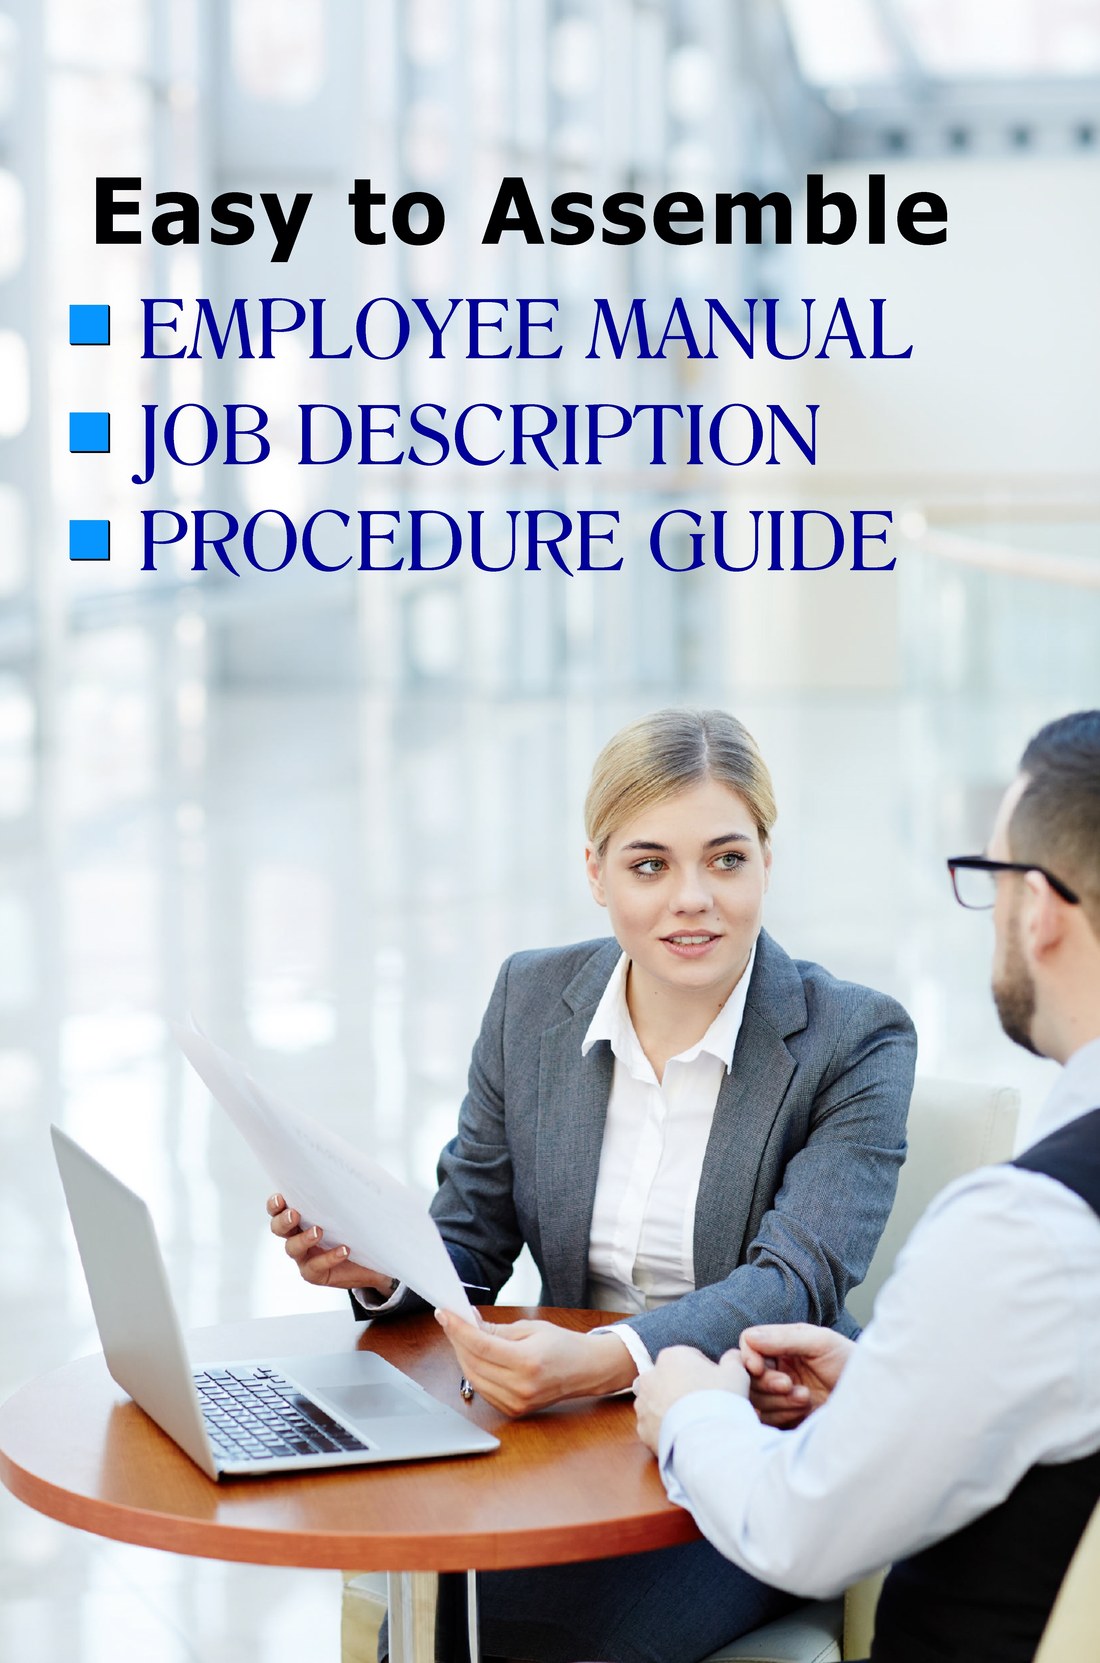 L7081 - How to Assemble an Employee Manual